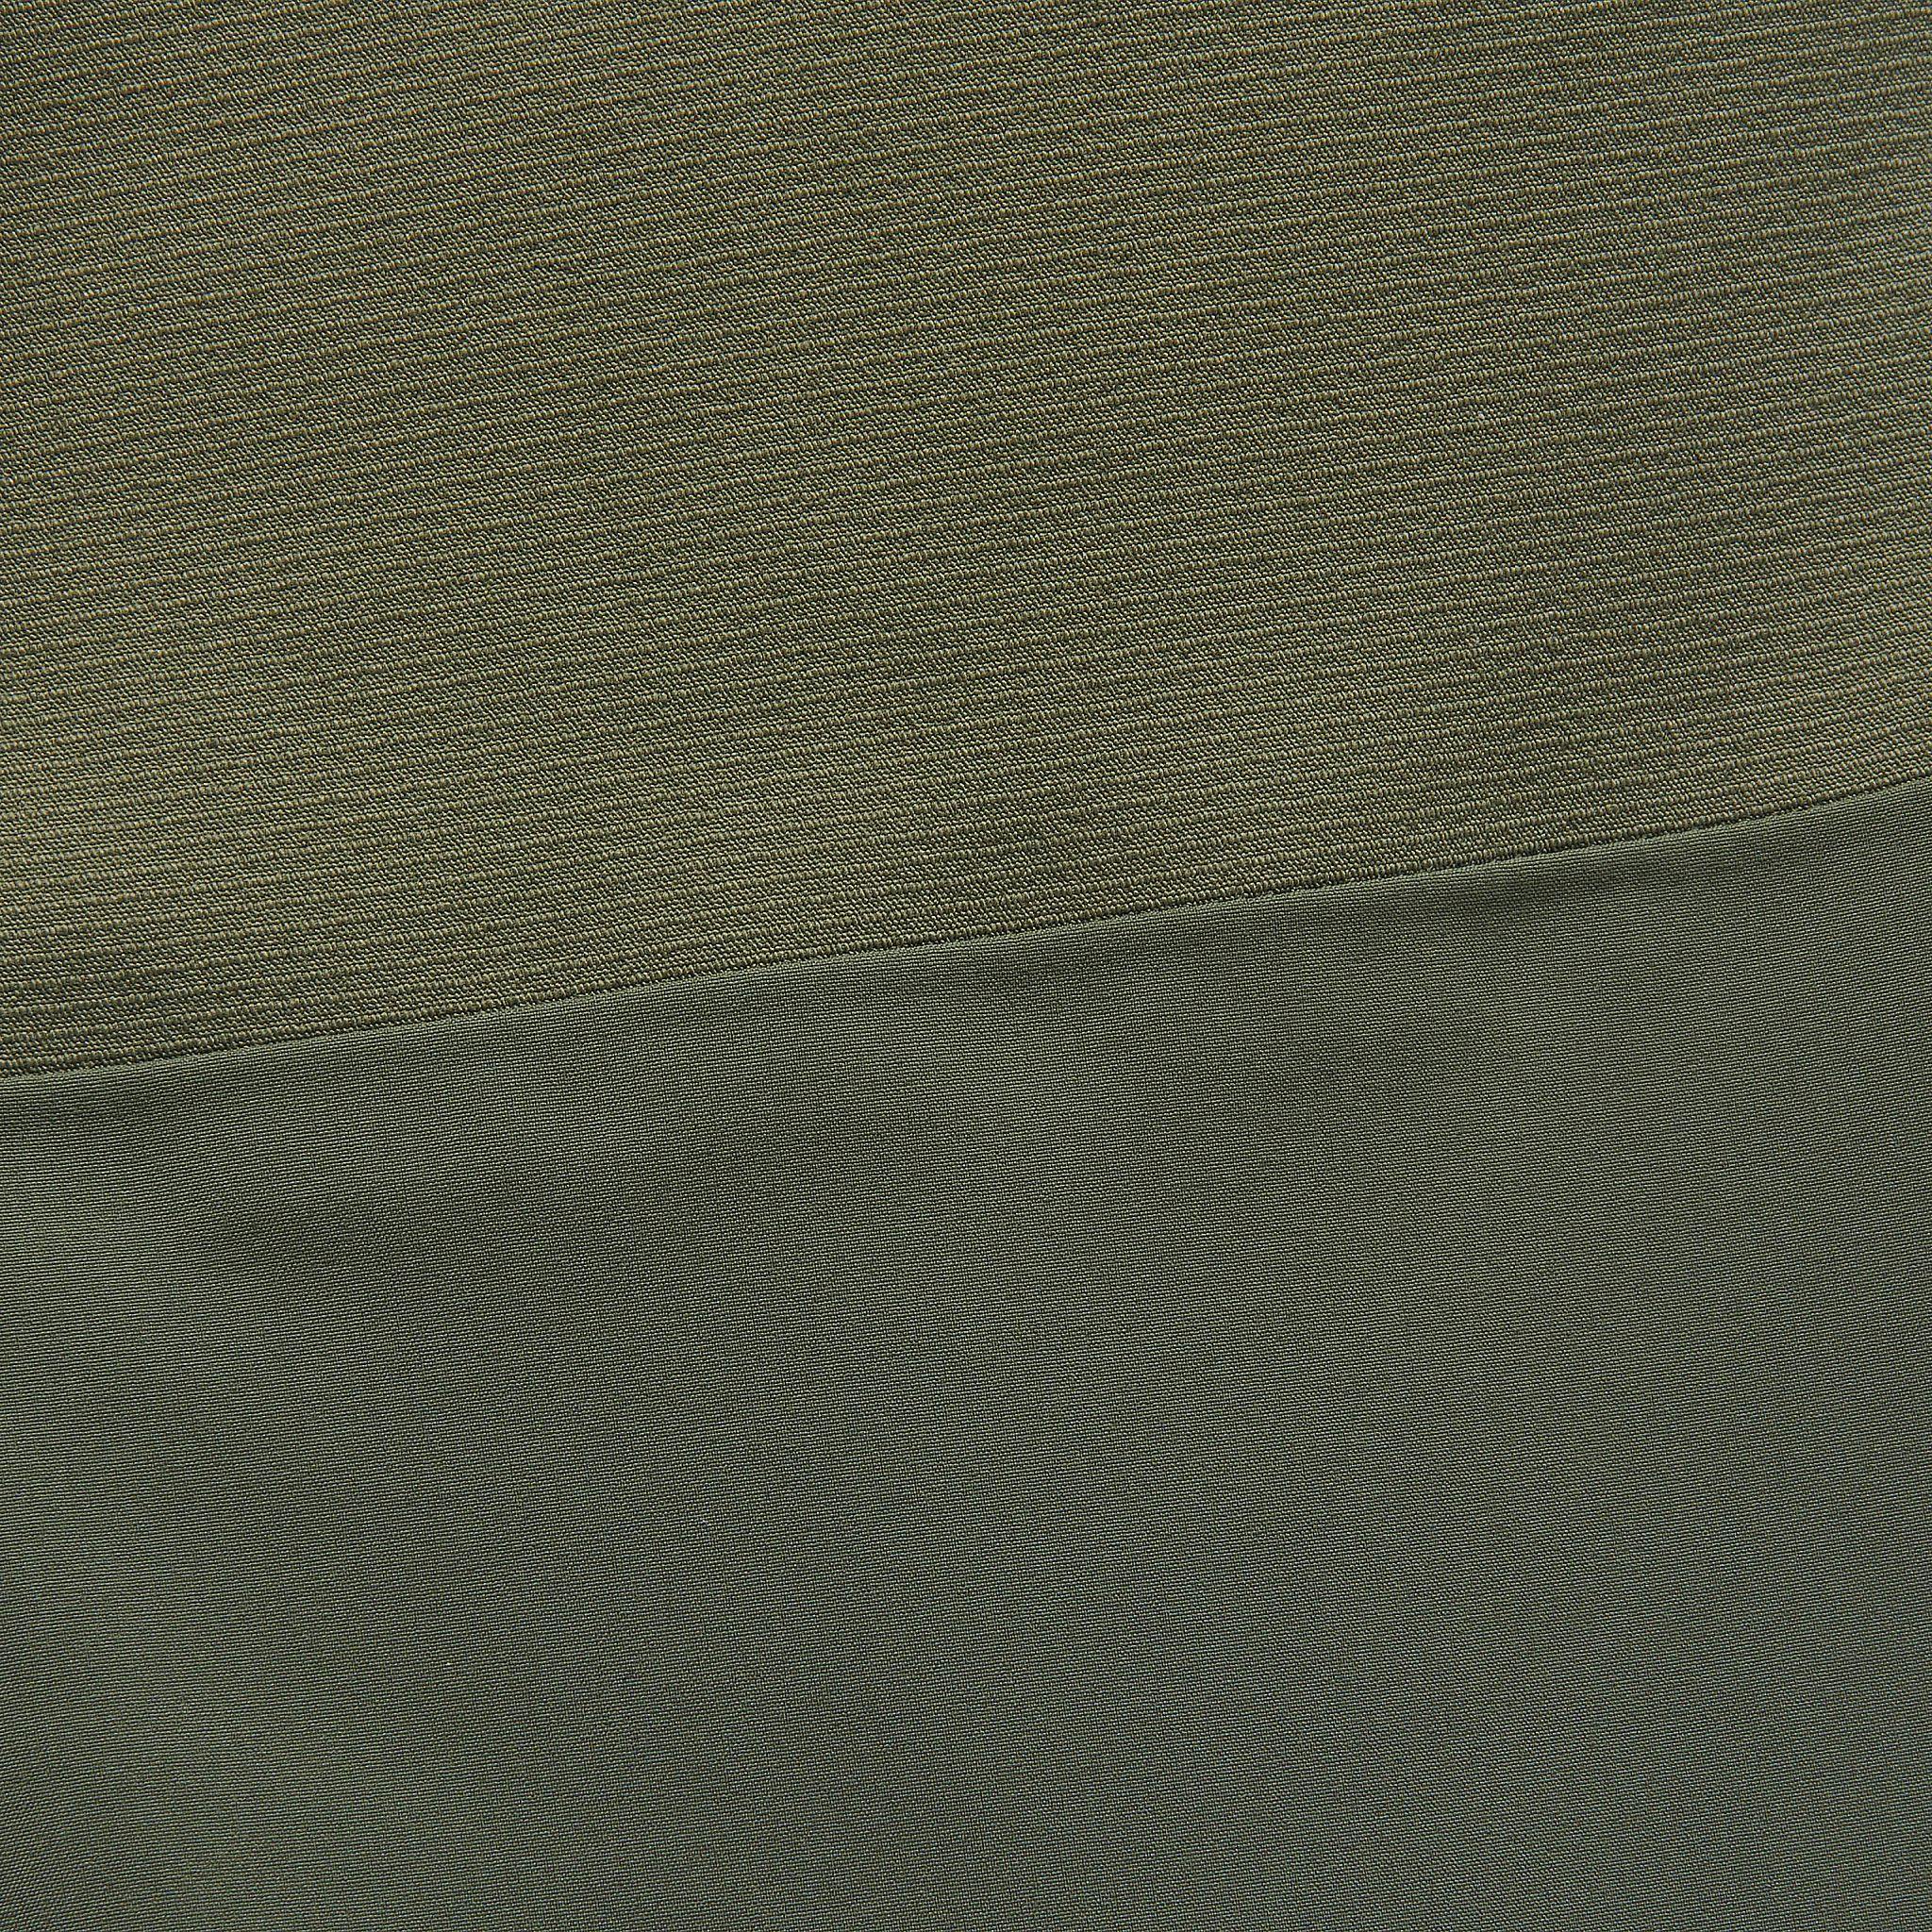 Recon Pro reinforced fabric detail shot